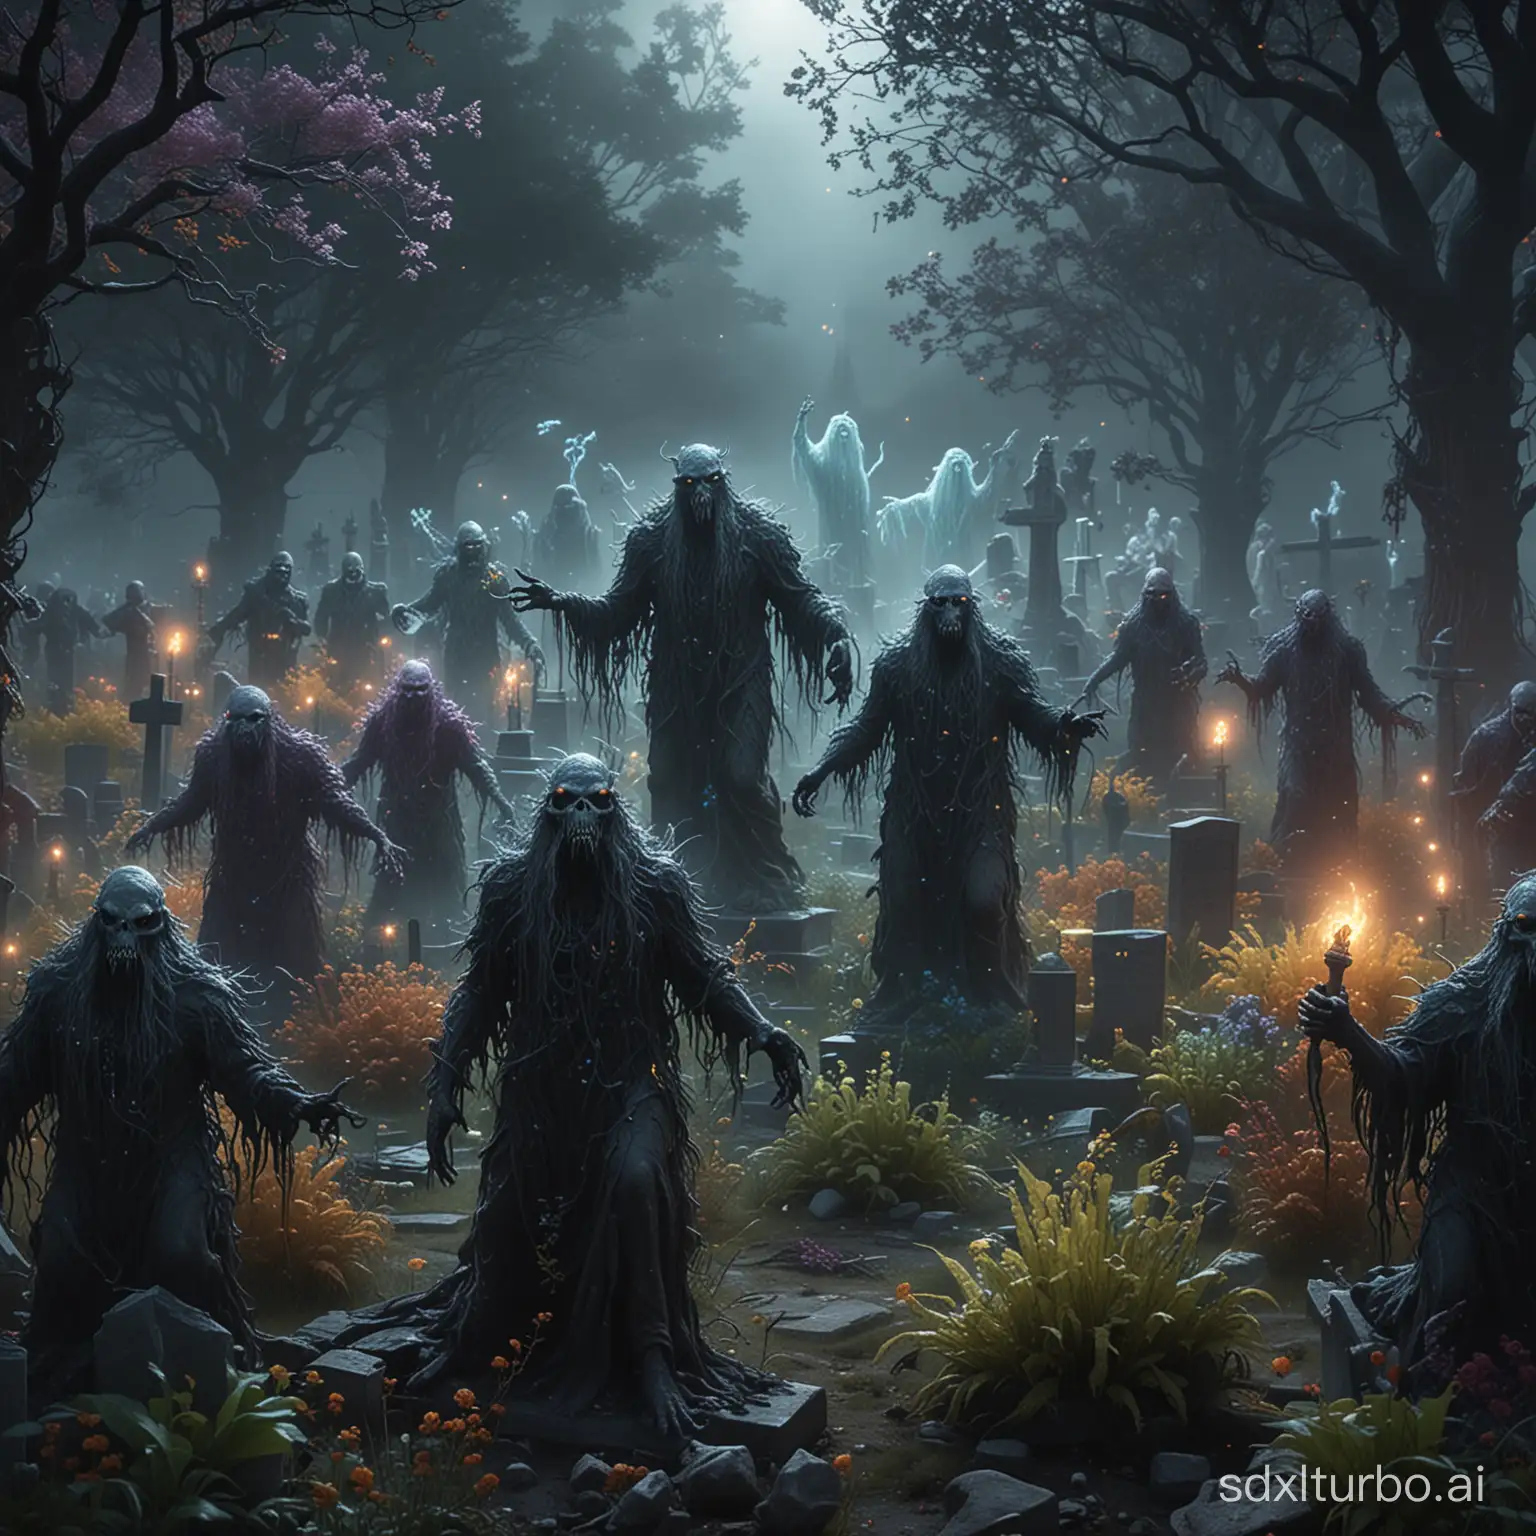 Ethereal-Dance-of-Malevolent-Monsters-Amidst-Luminous-Plants-and-Dreamlike-Light-in-Cemetery